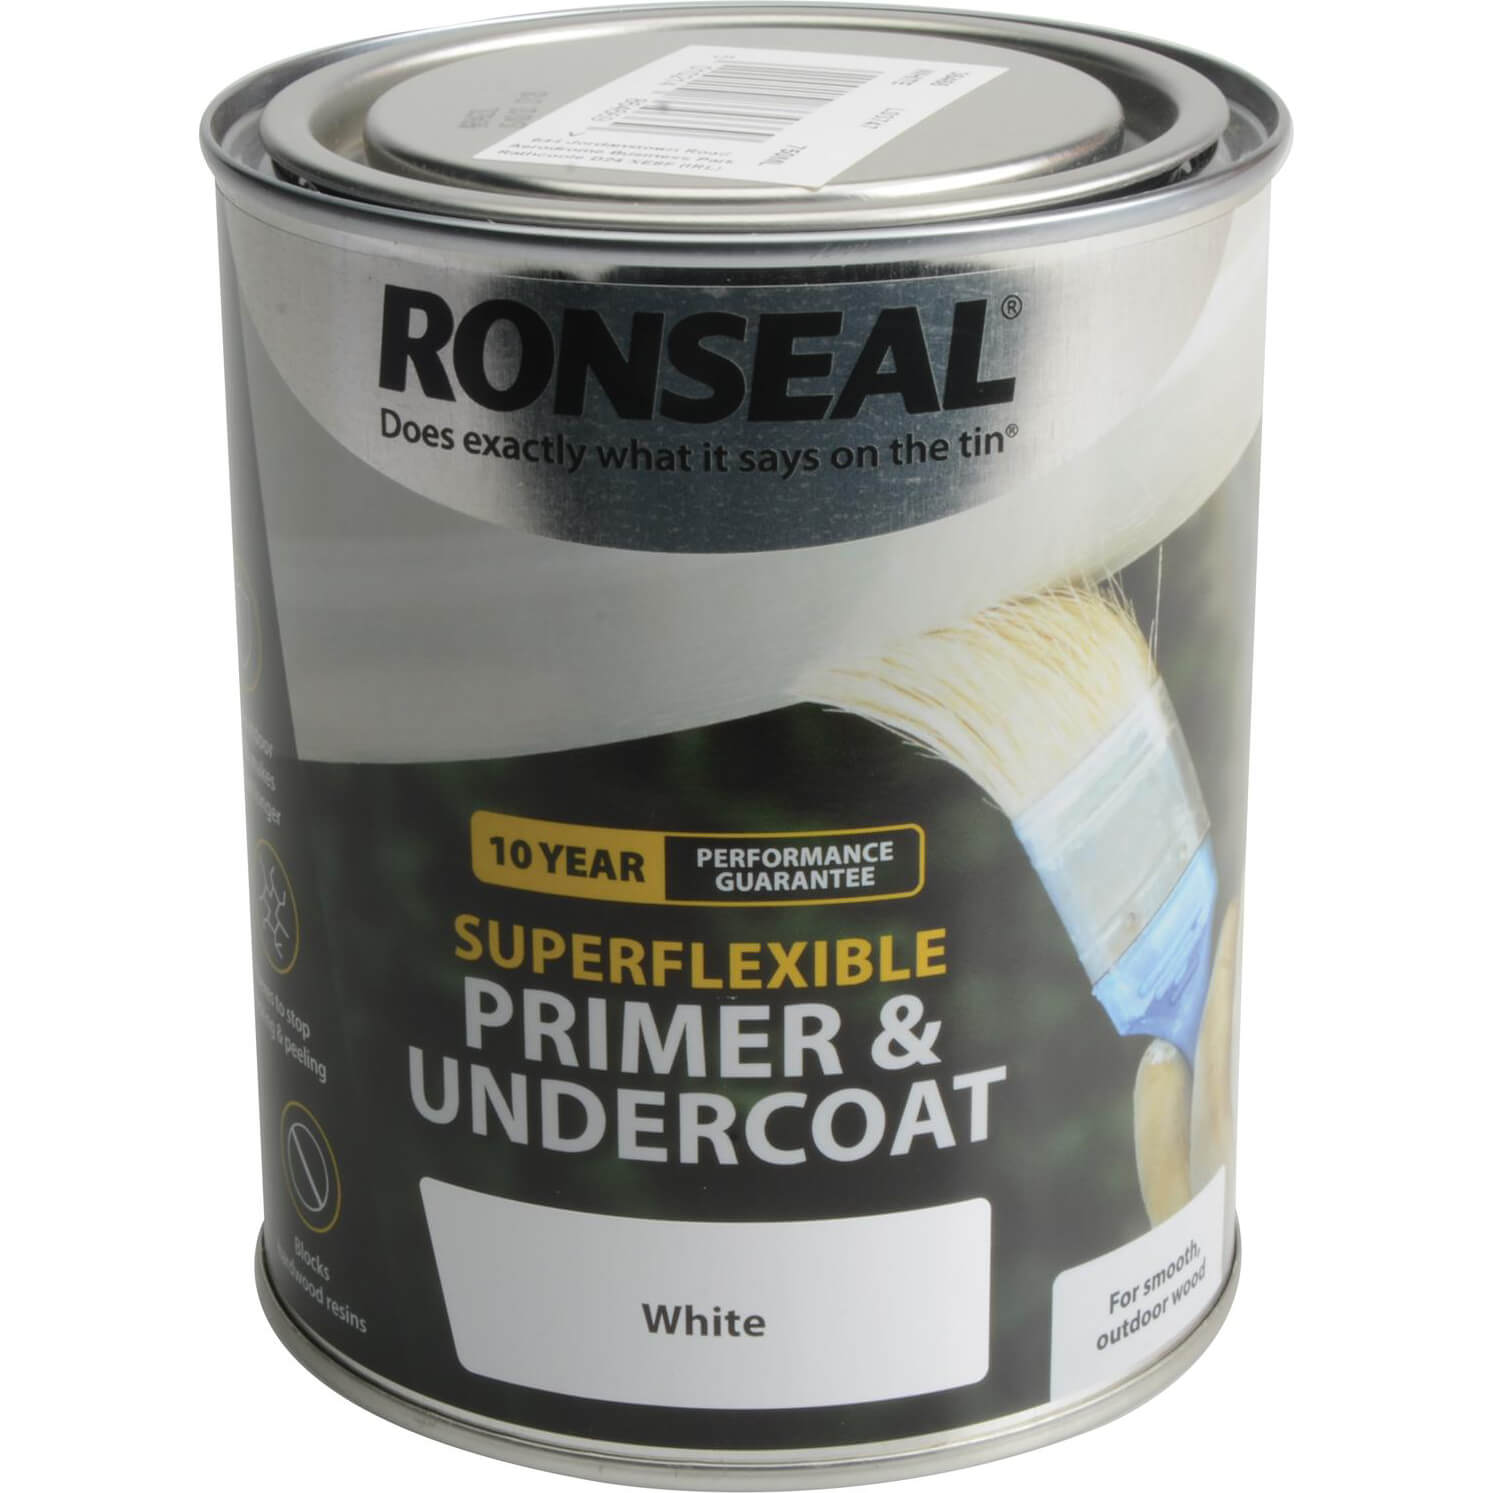 Ronseal Super Flexible Wood Primer and Undercoat White 750ml